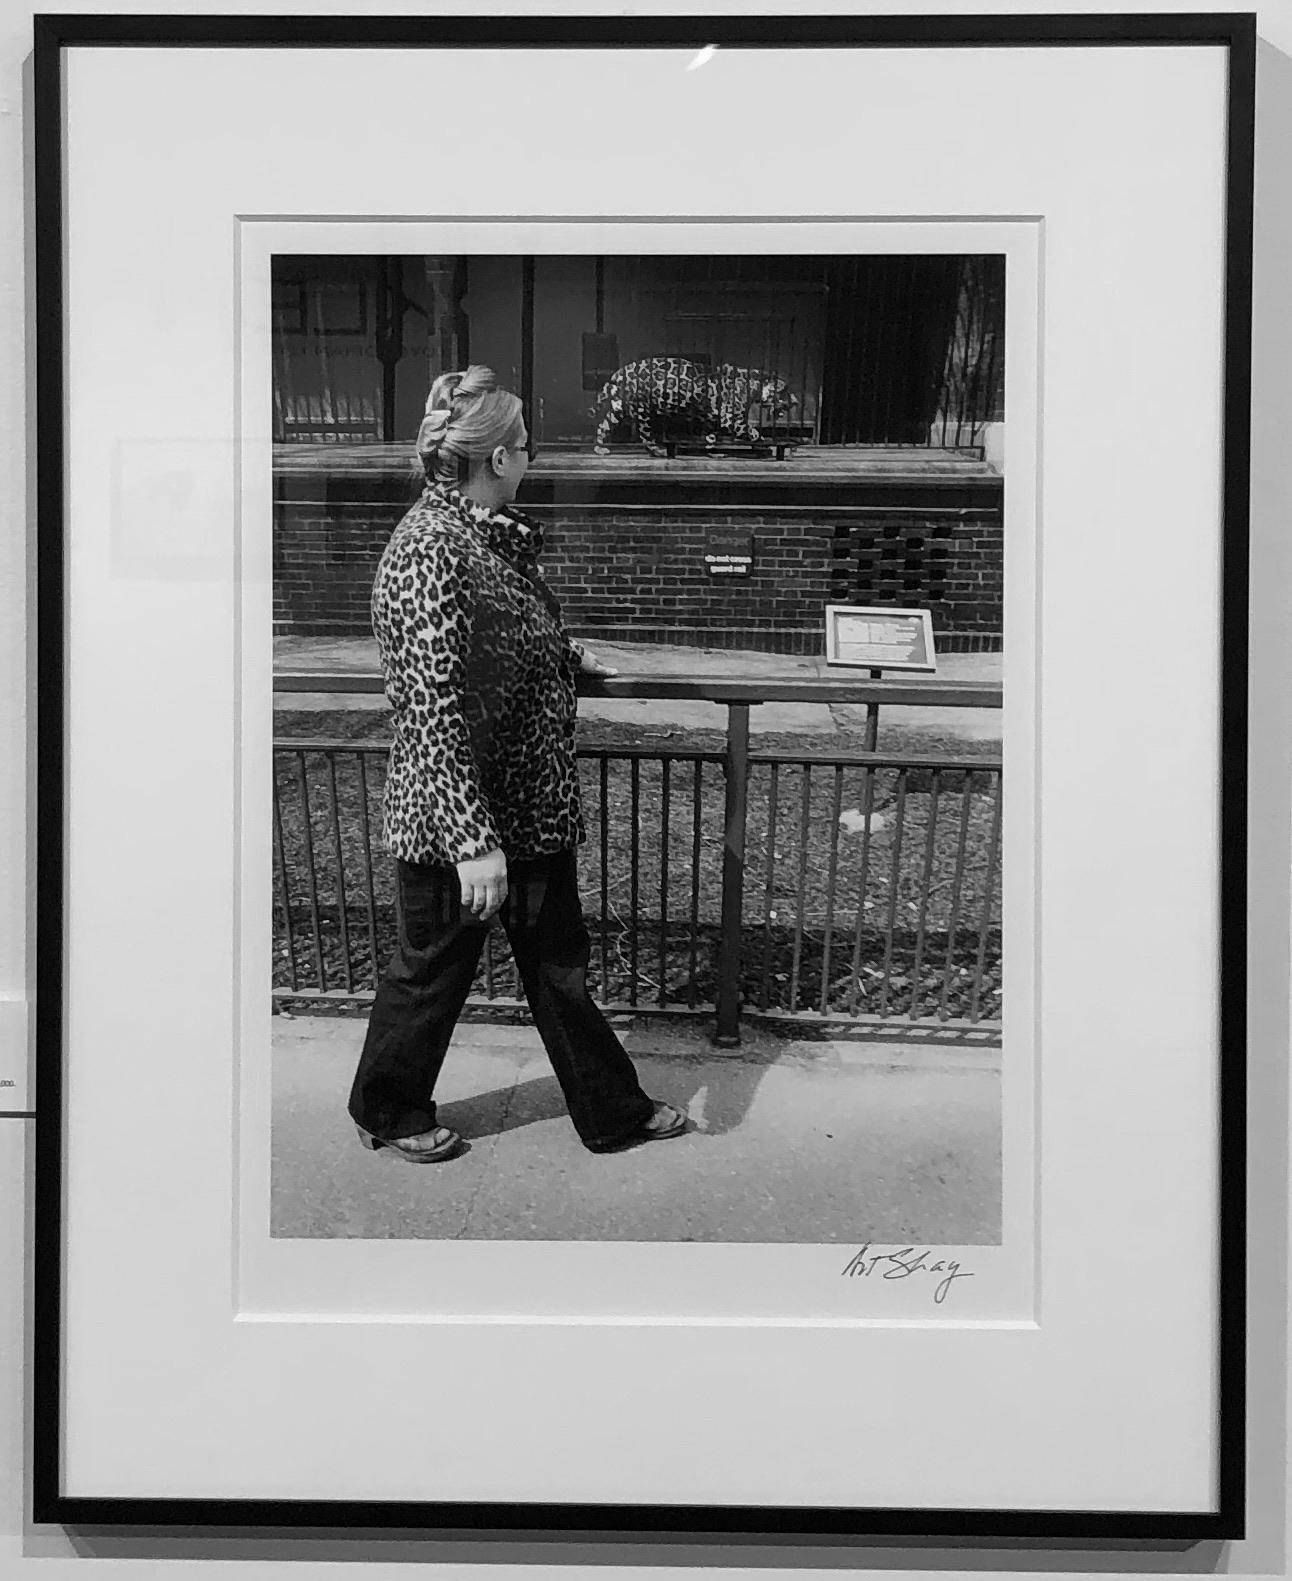 Two Leopards Spotted, Chicago 1974, Brookfield Zoo, Signed and Framed. - Photograph by Art Shay